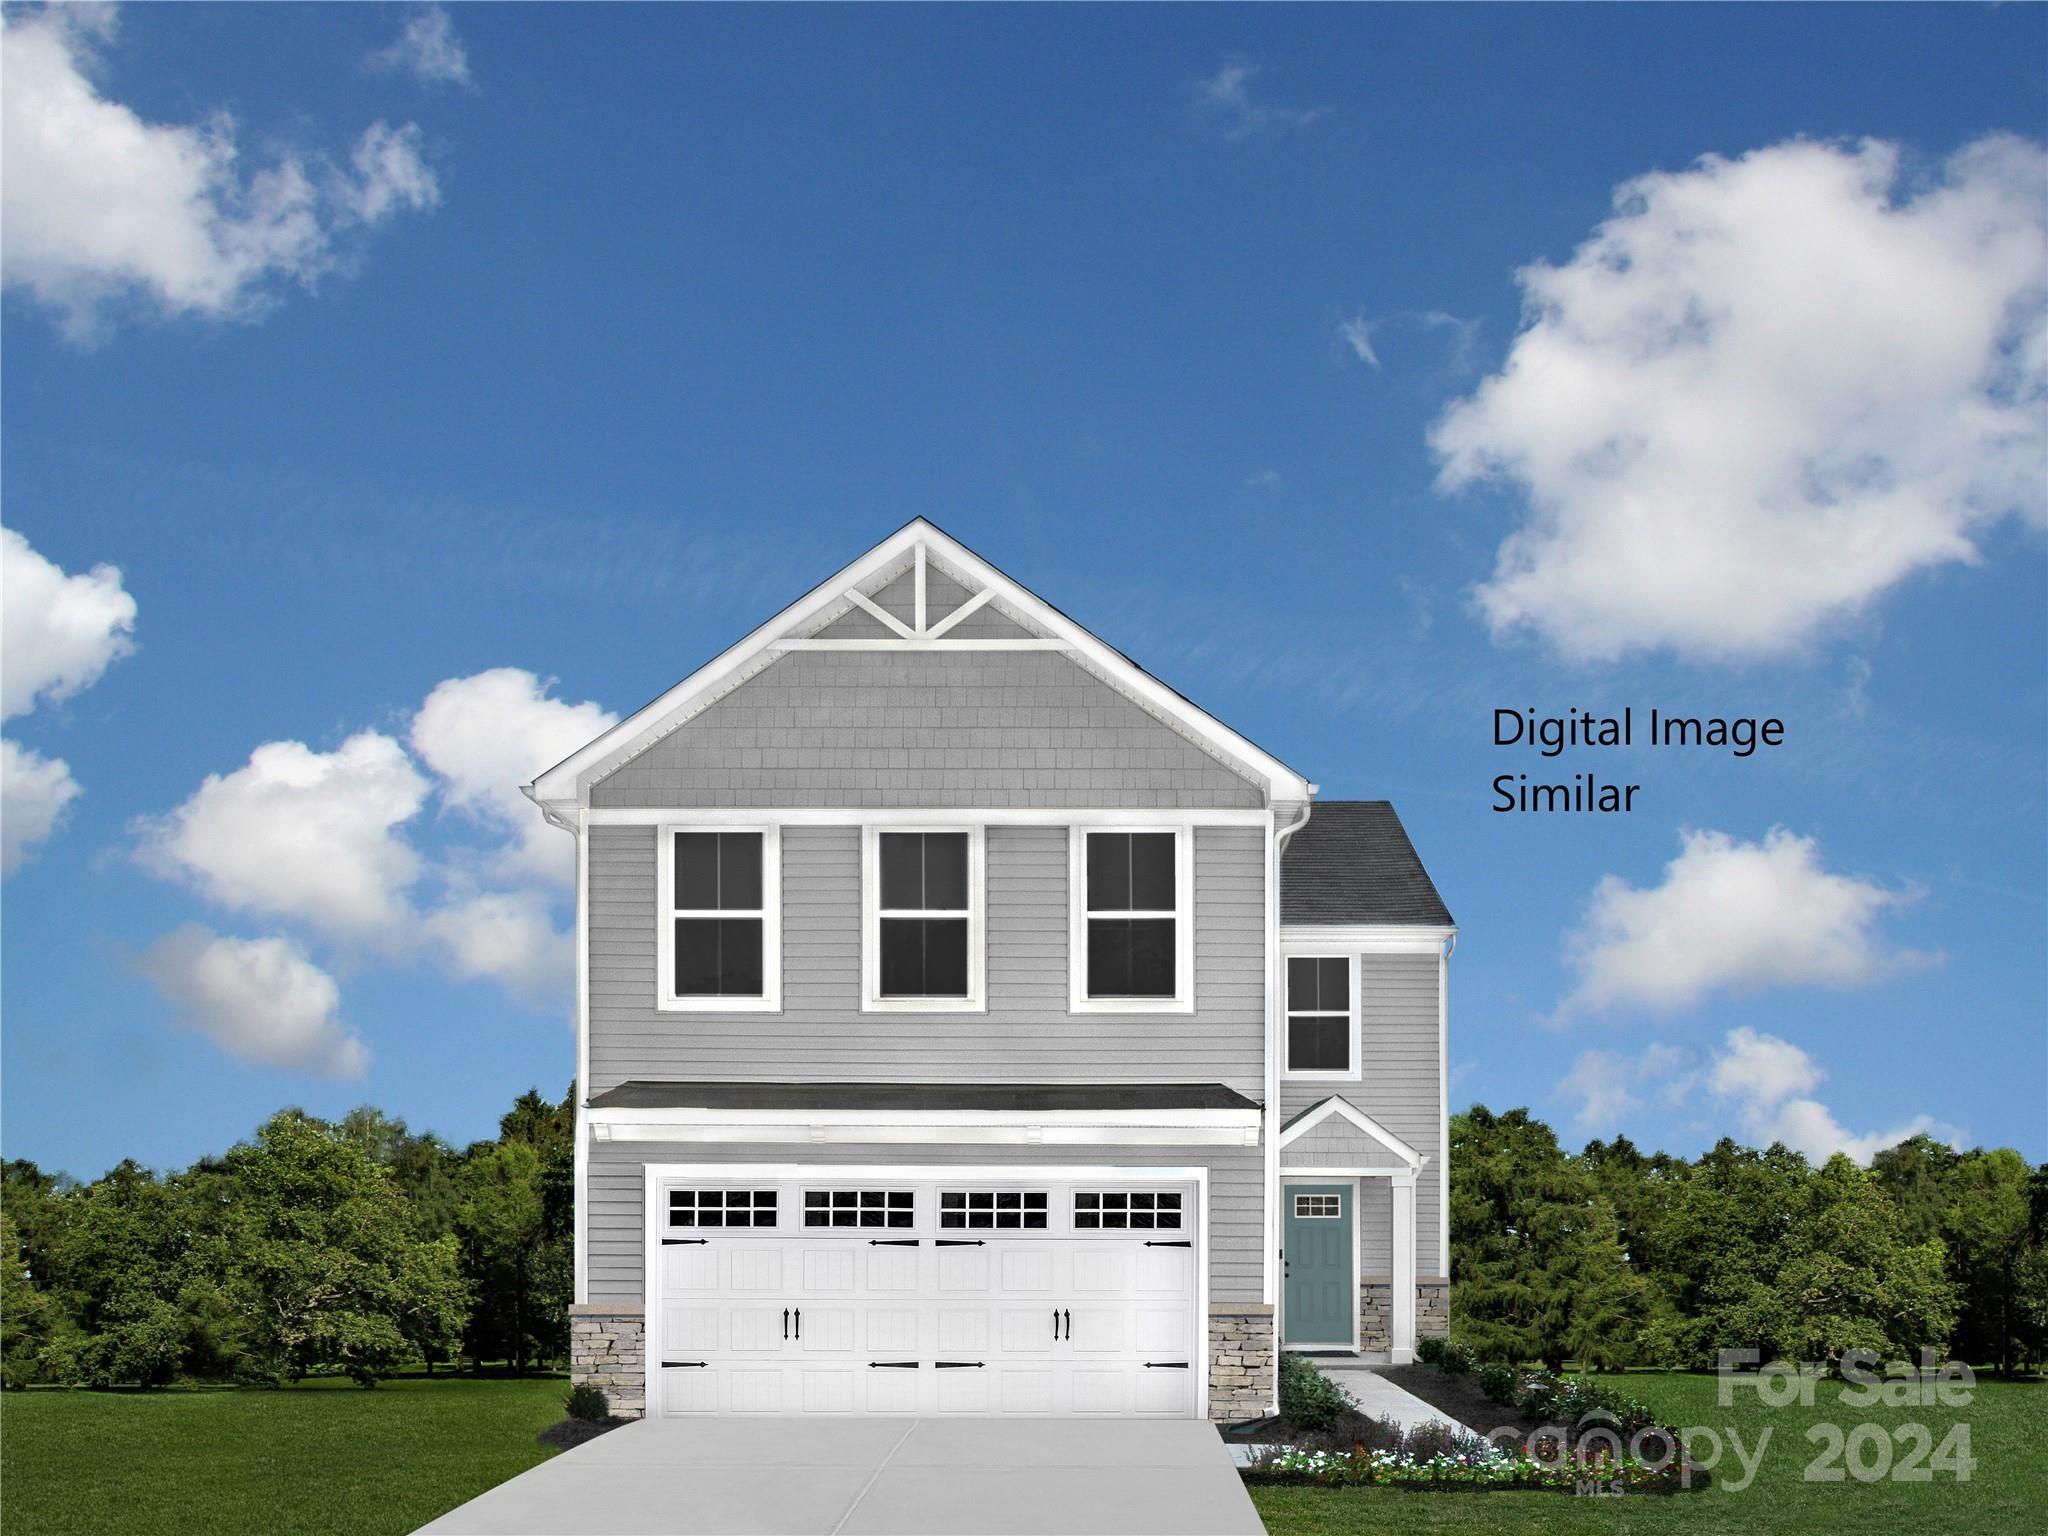 Property Image for 2309 Silver Creek Road 0074